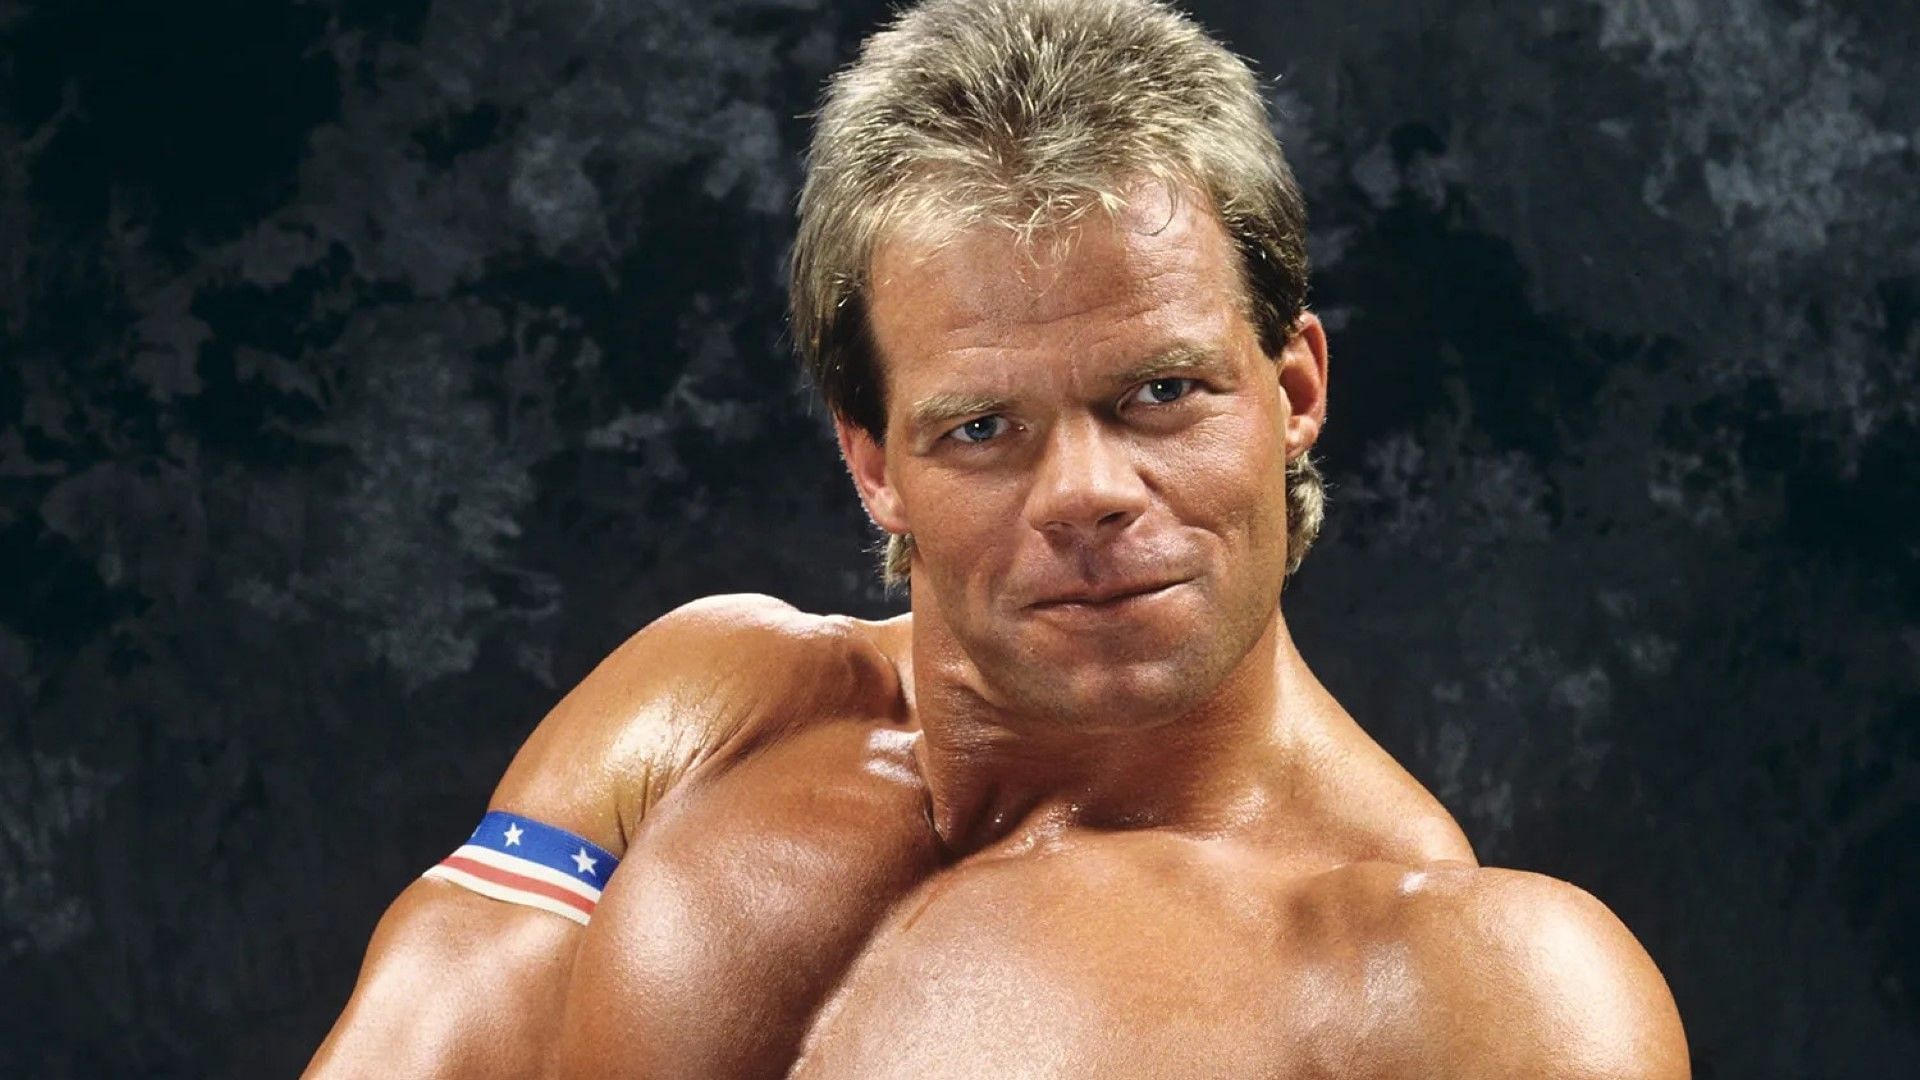 Lex Luger poses for WWE photo shoot